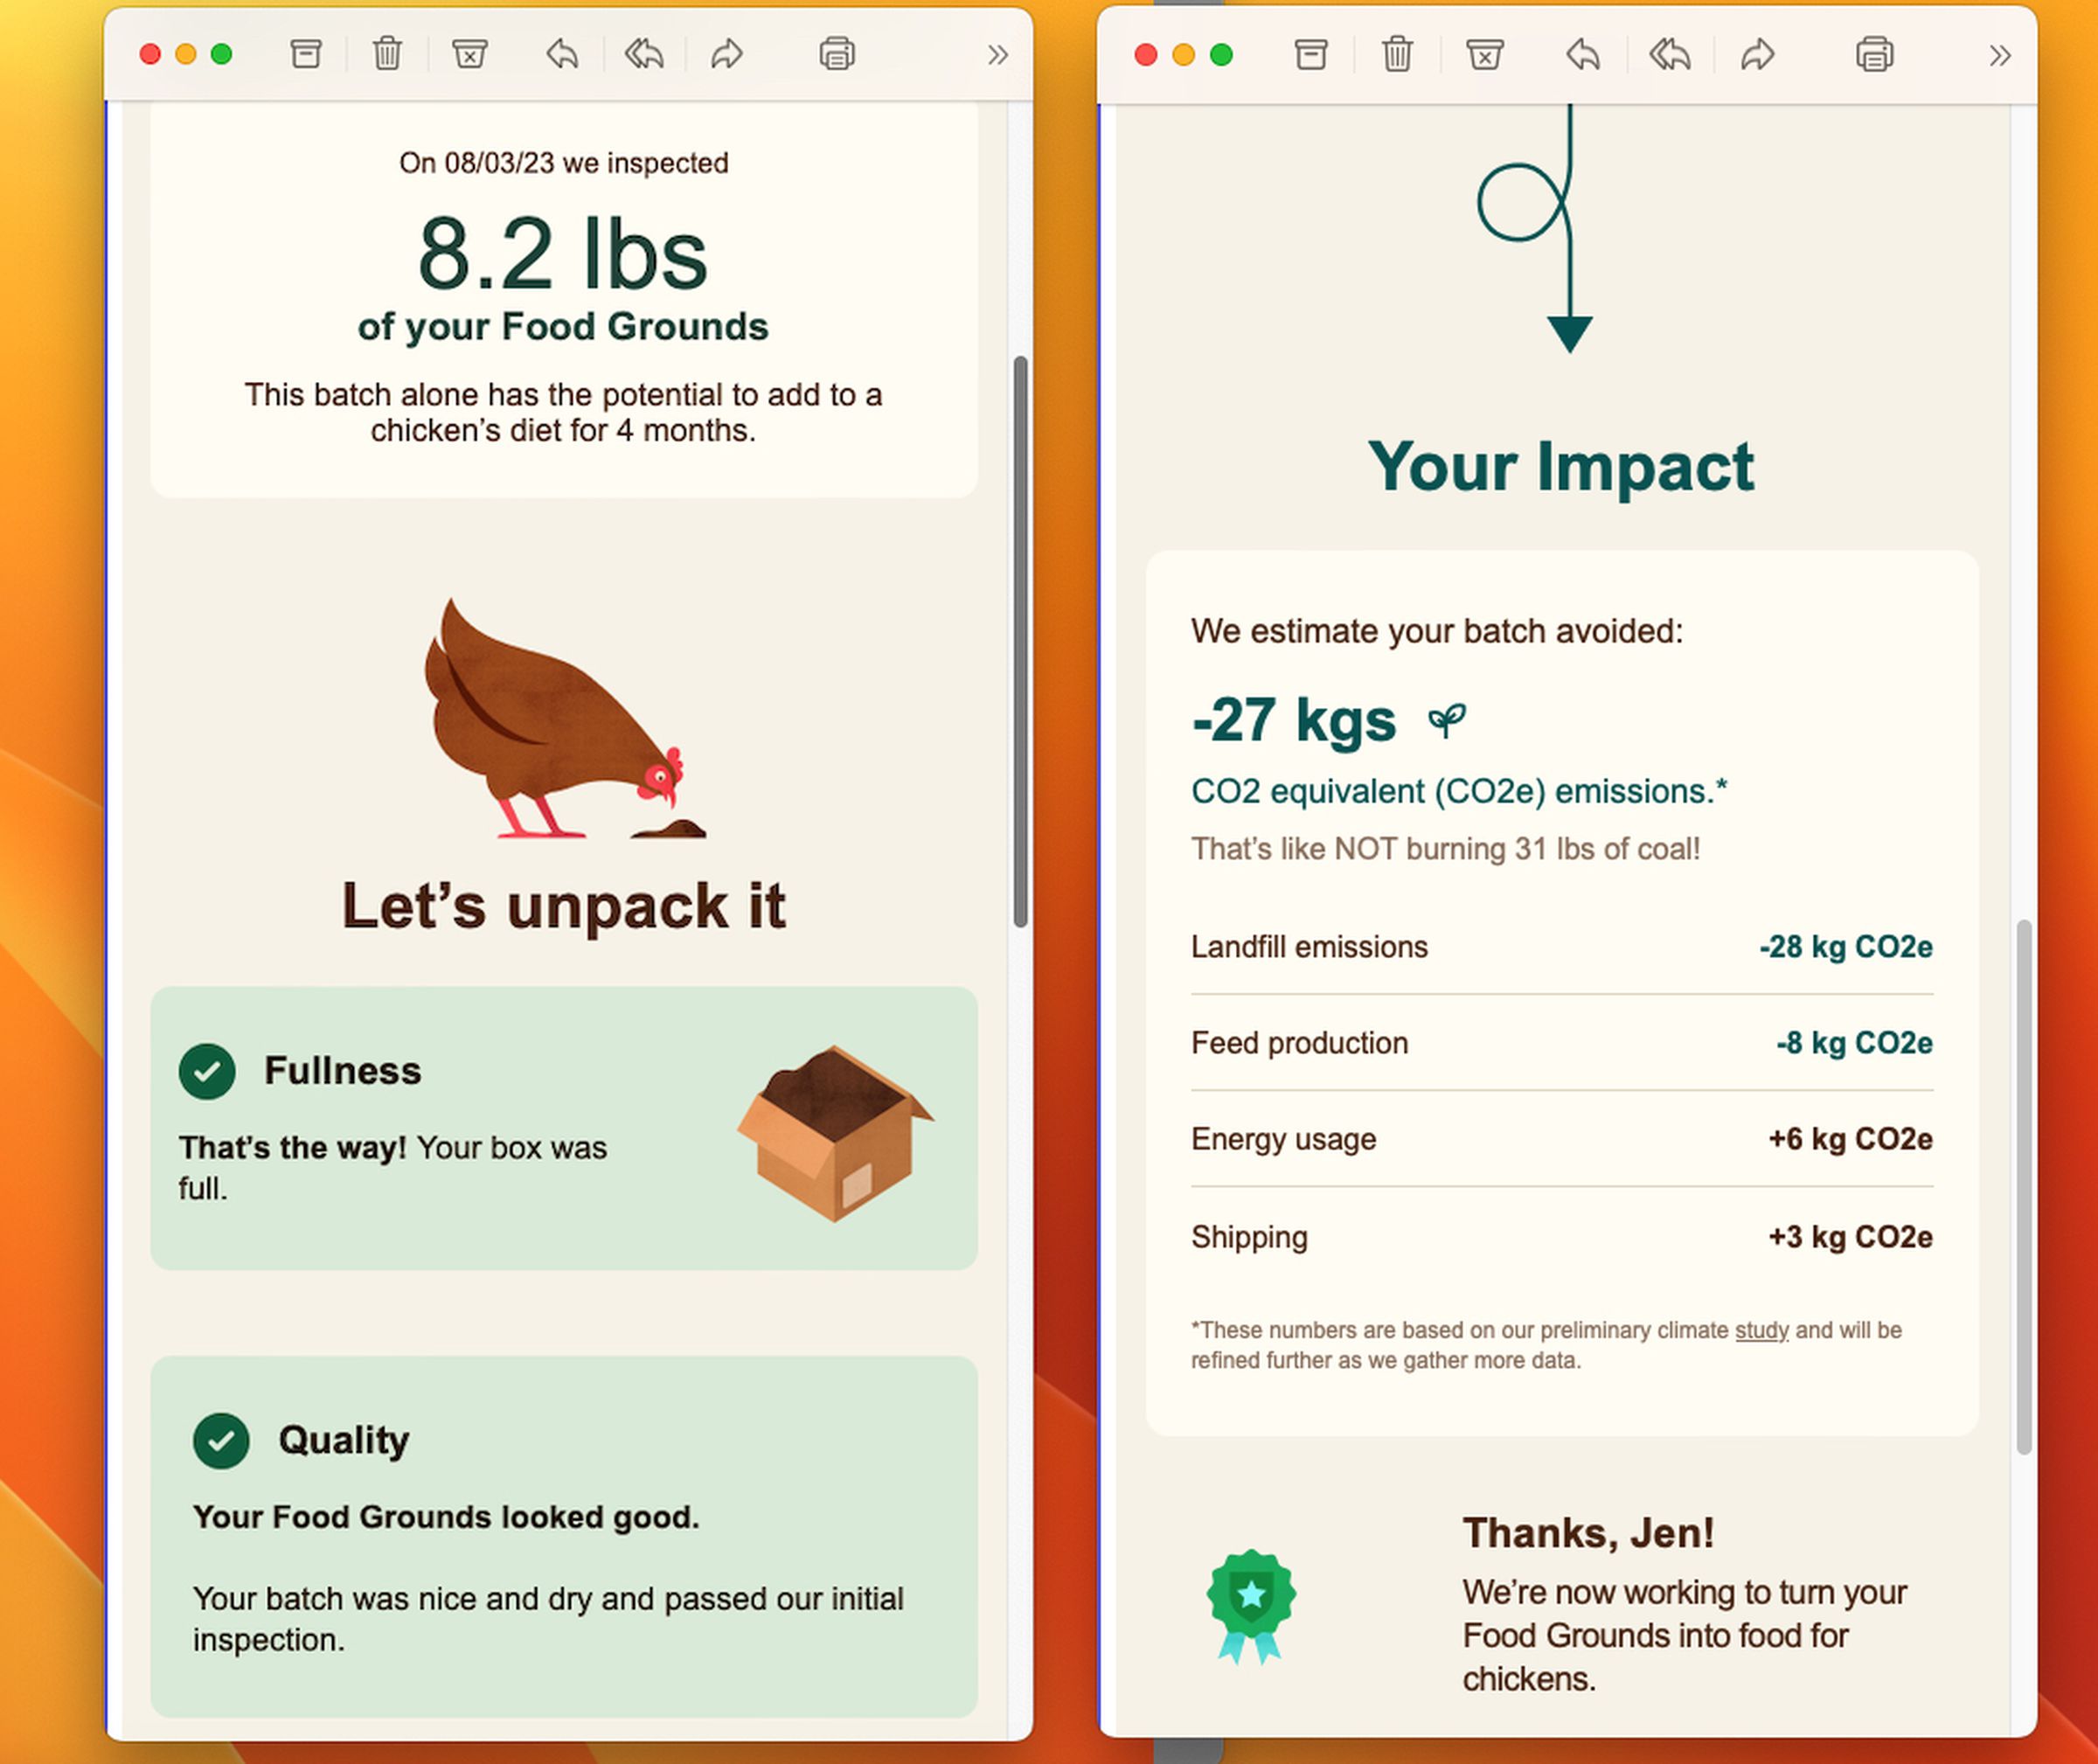 The Mill impact report said my 8.2 lbs of food waste had saved the equivalent of not burning 31 lbs of coal. The company uses a Lifecycle Assessment to calculate the overall impact of each part of its process.